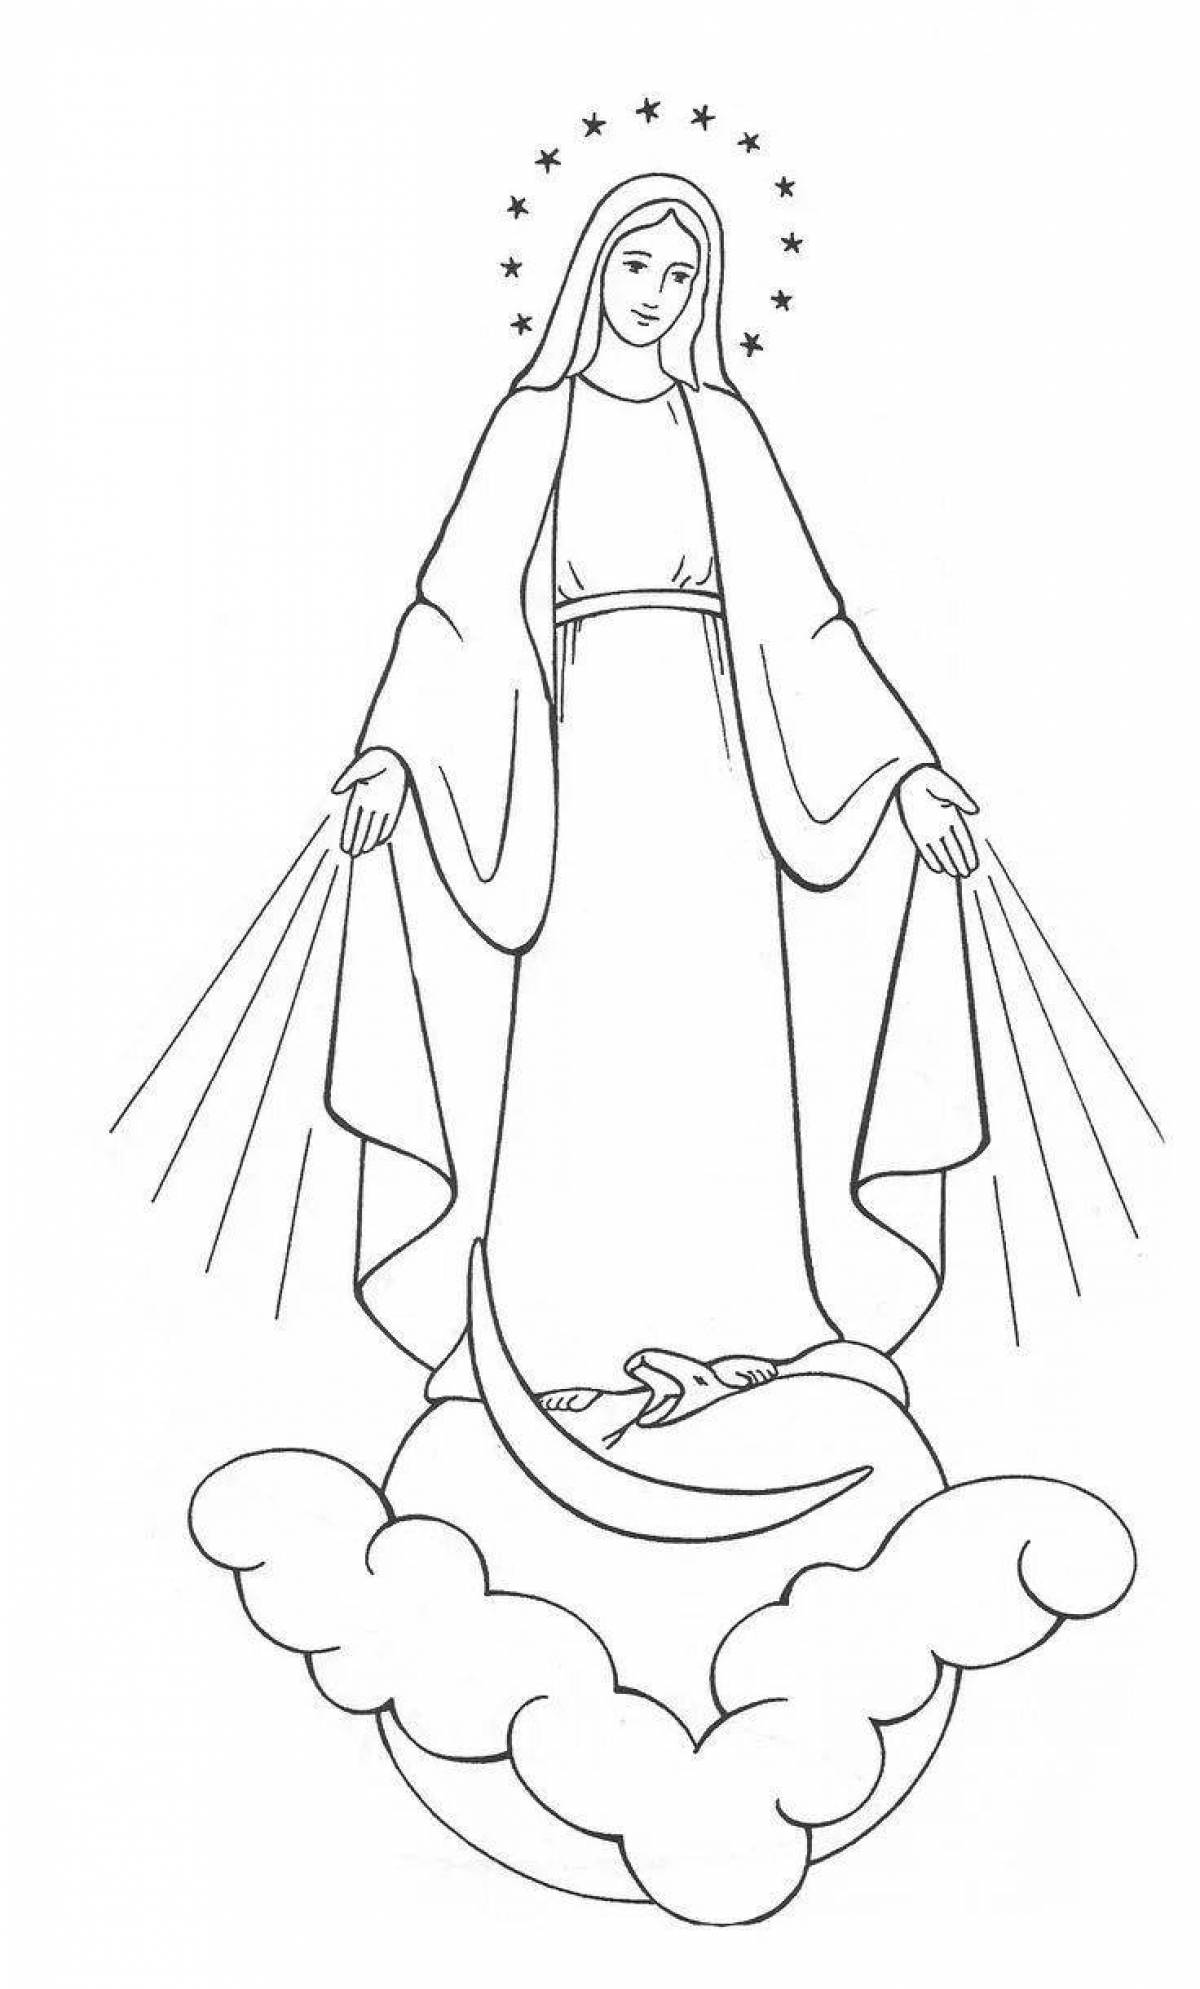 Coloring page celestial virgin mary